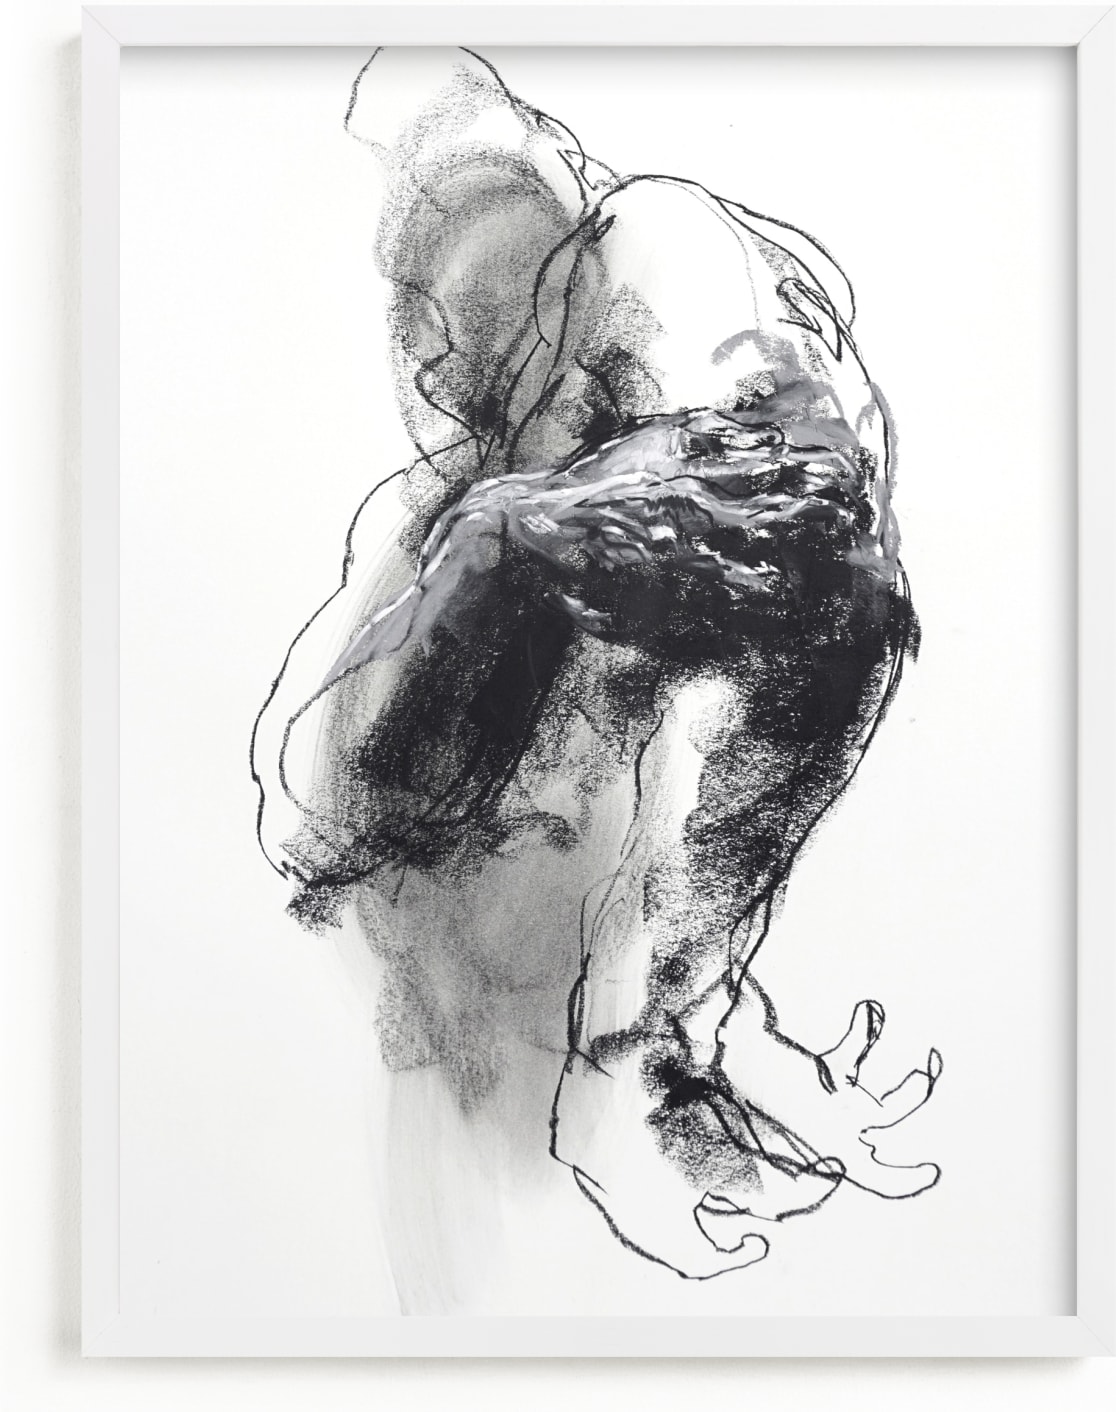 This is a black and white art by Derek overfield called Drawing 340 - Grasping Man.